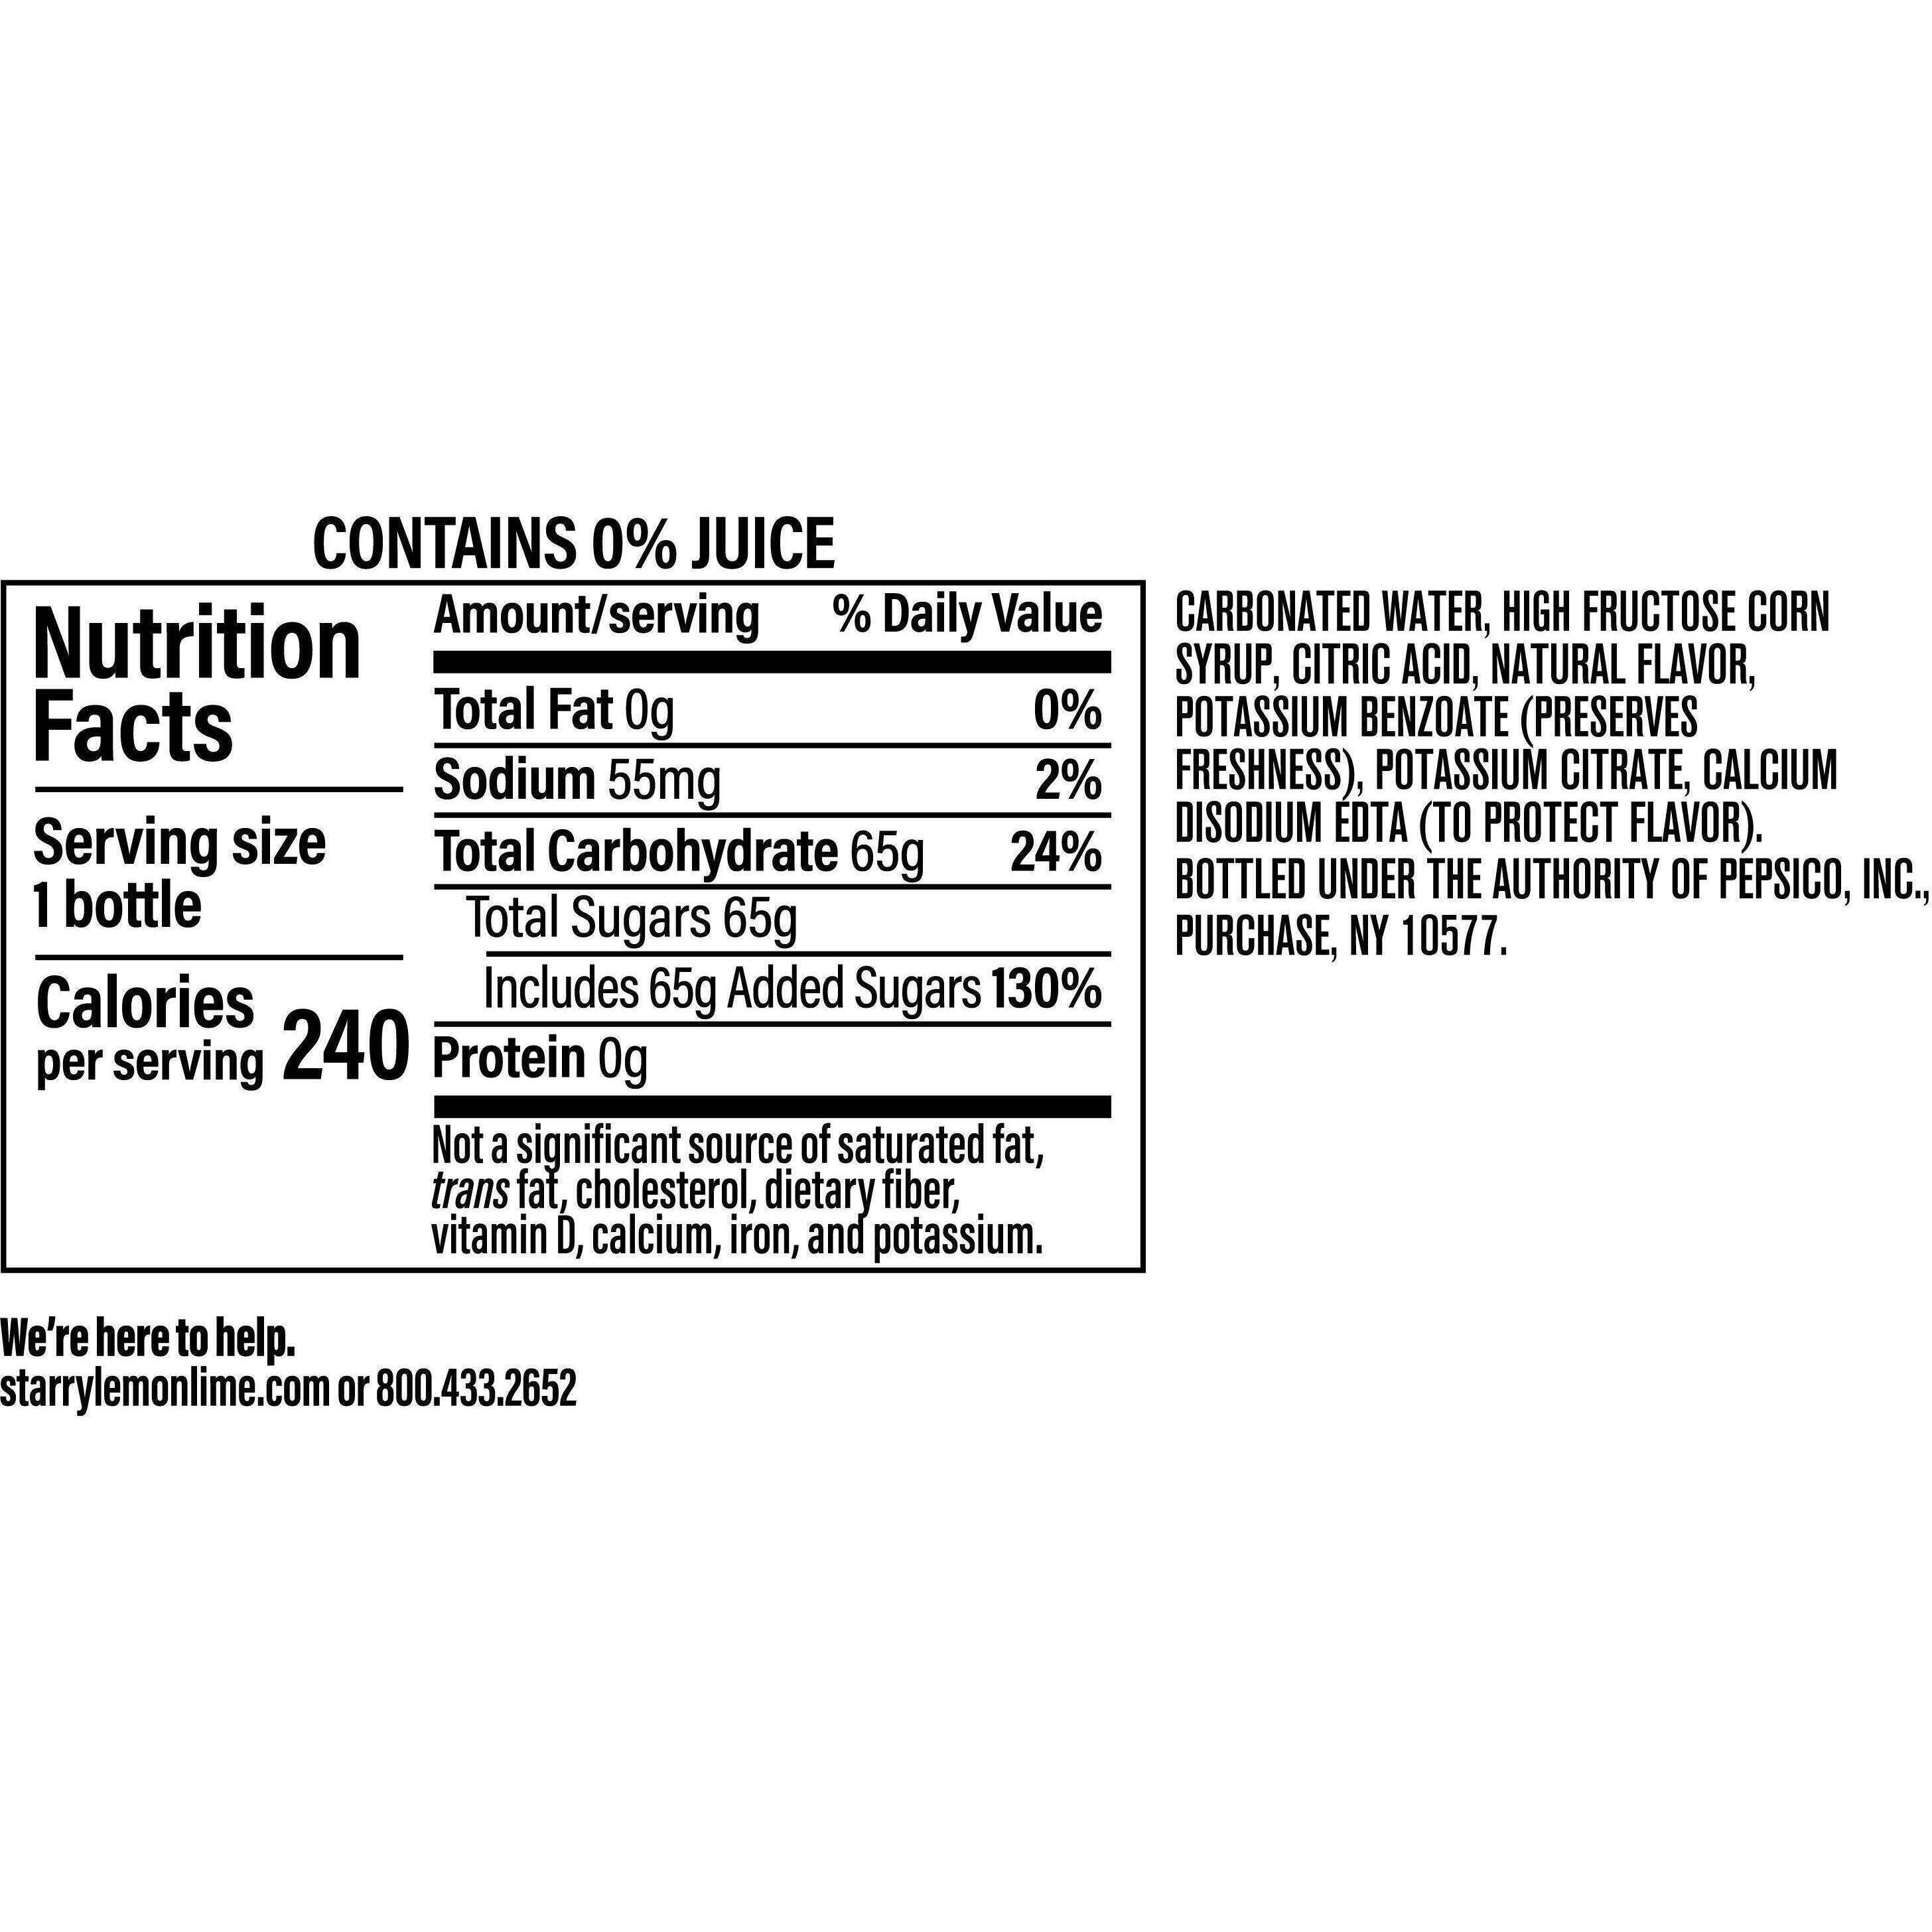 Image describing nutrition information for product Starry